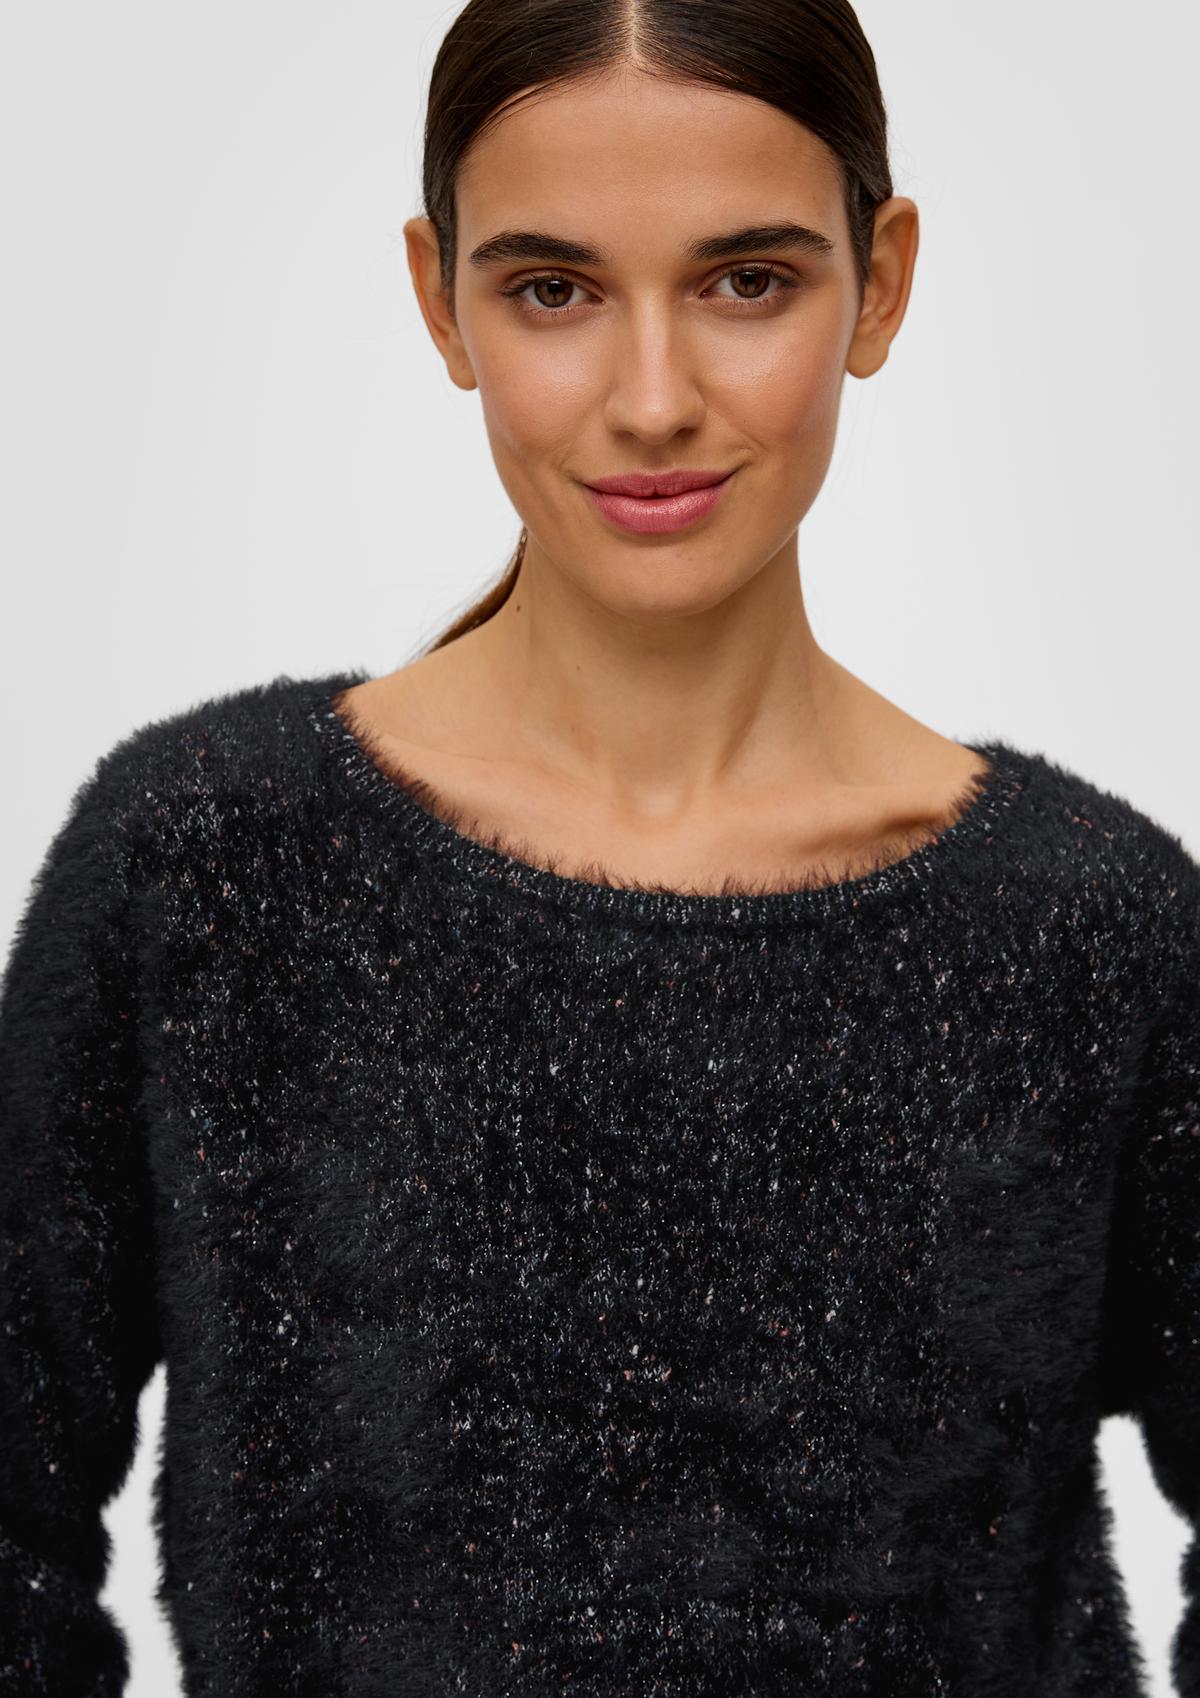 s.Oliver Knitted jumper with metallic yarn